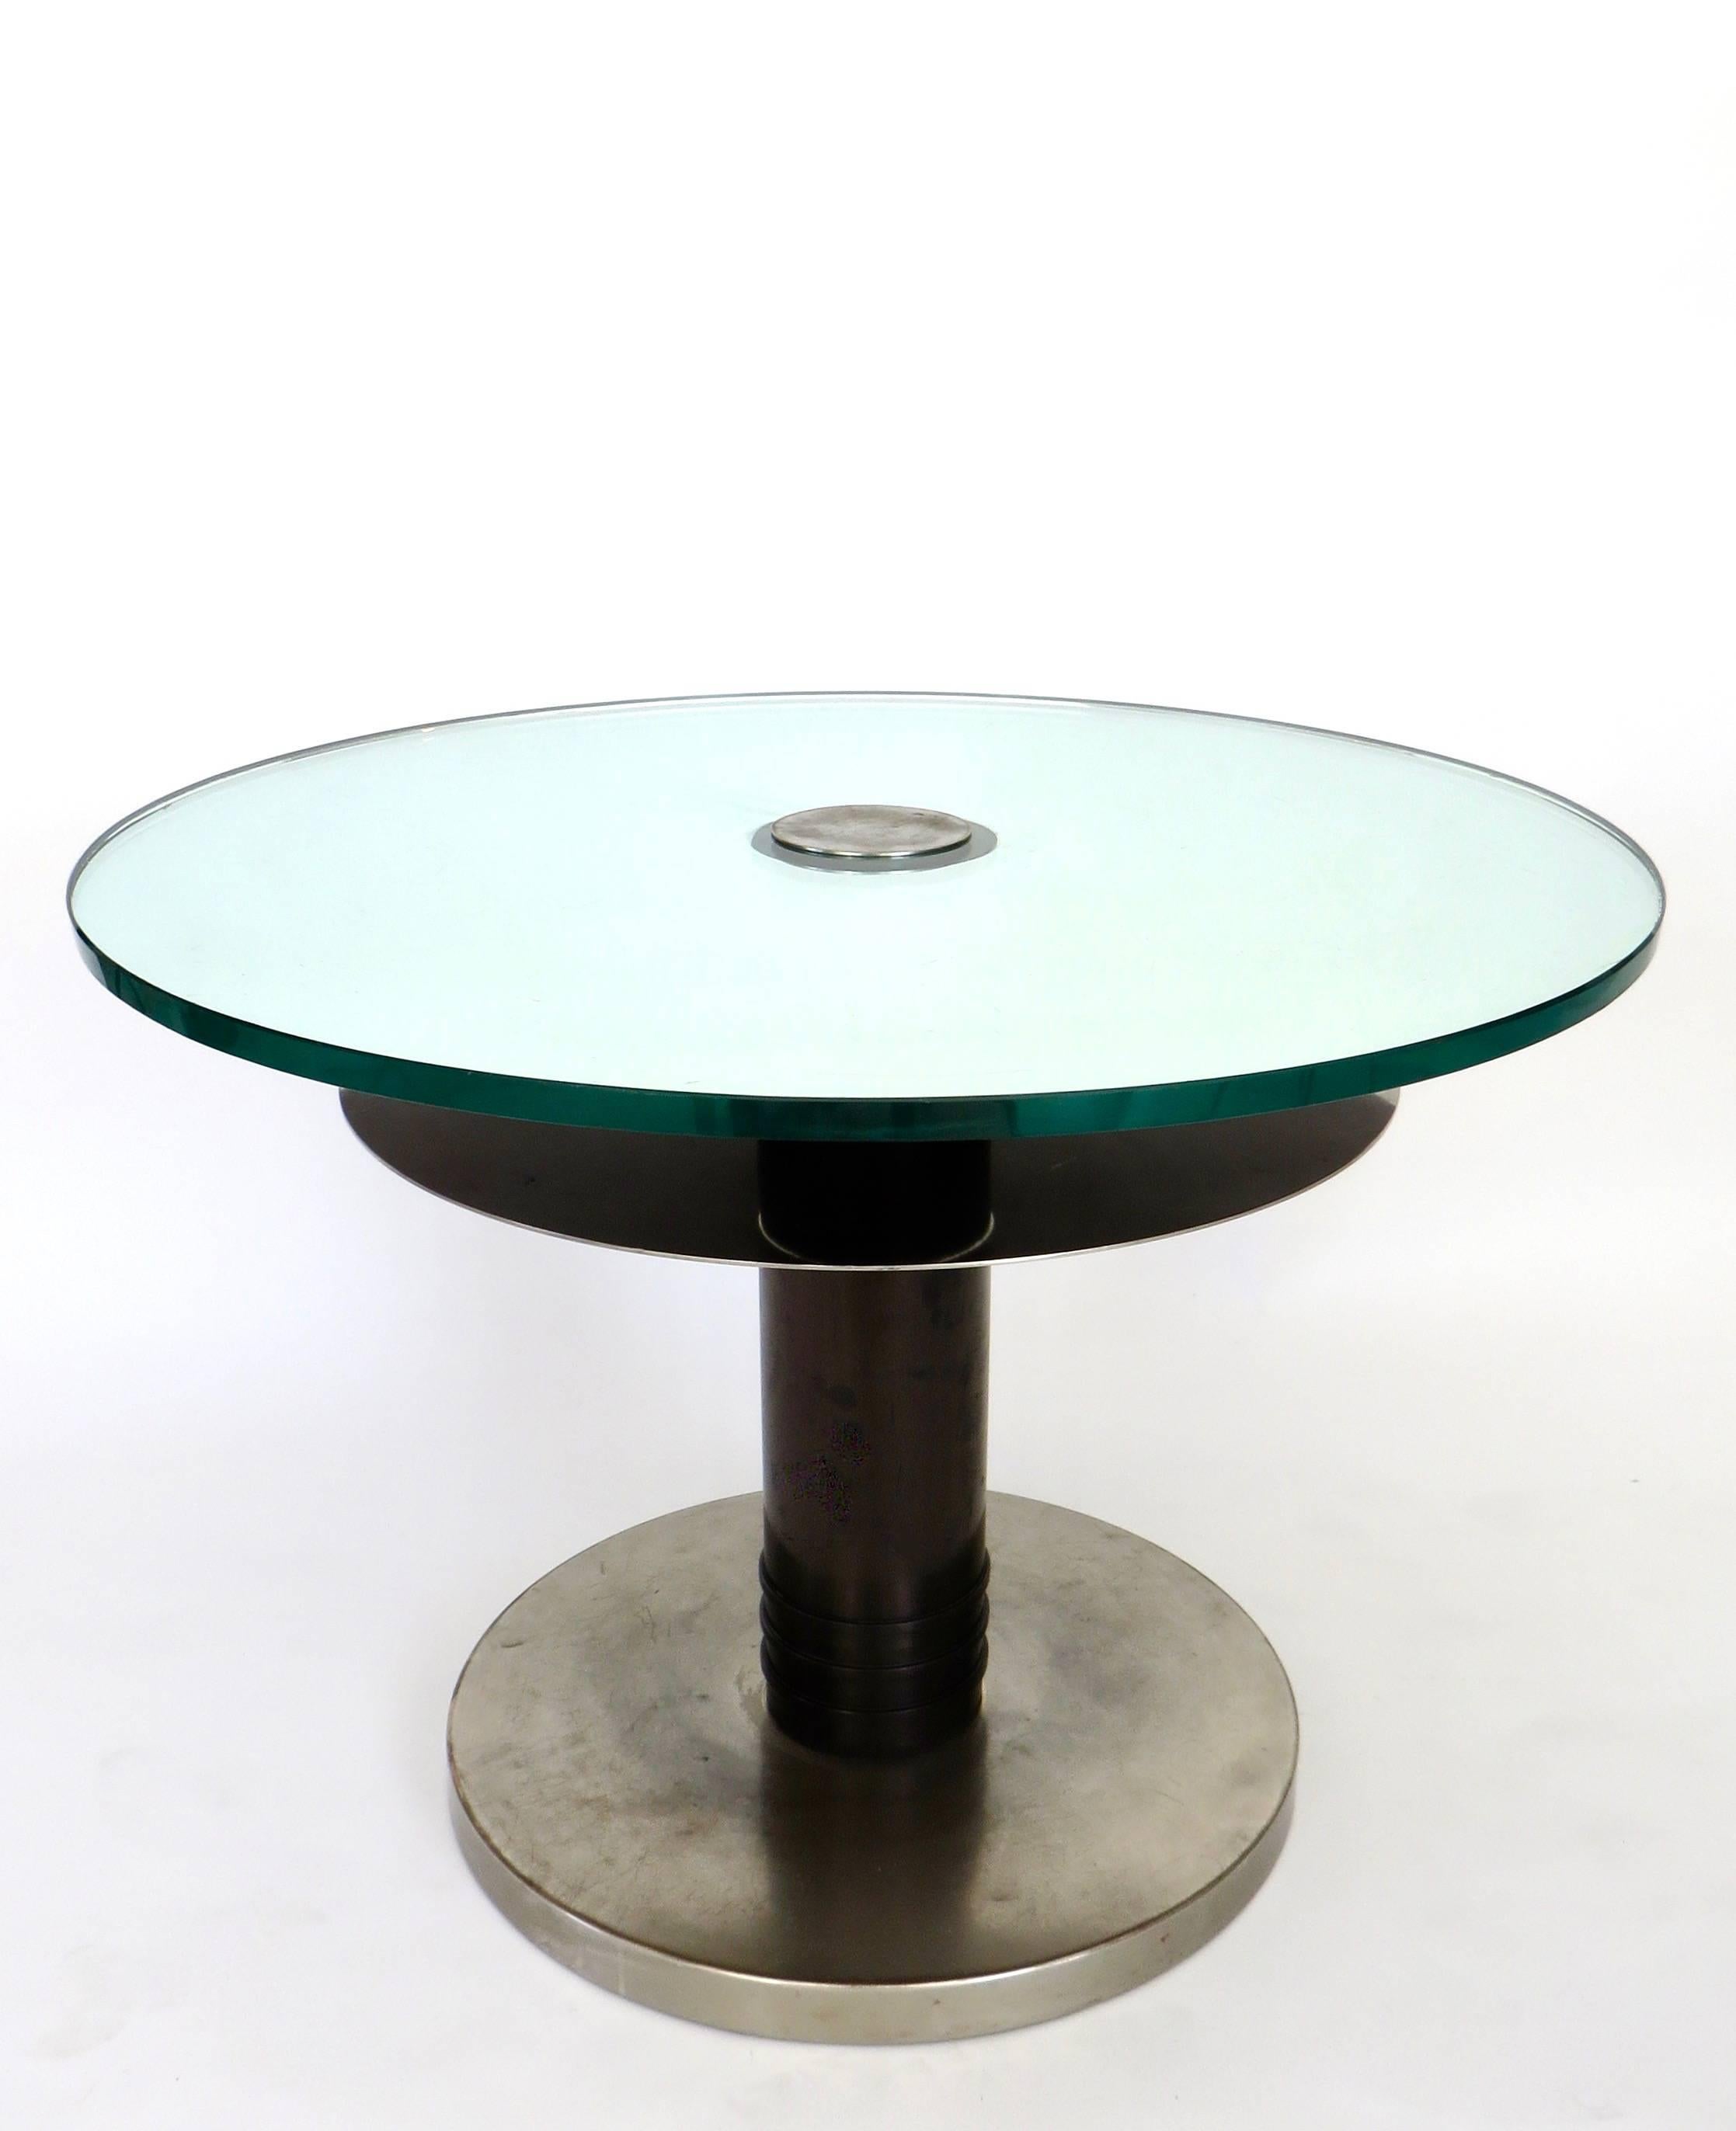 Mid-20th Century Axel Einar Hjorth Typenko Occasional Table